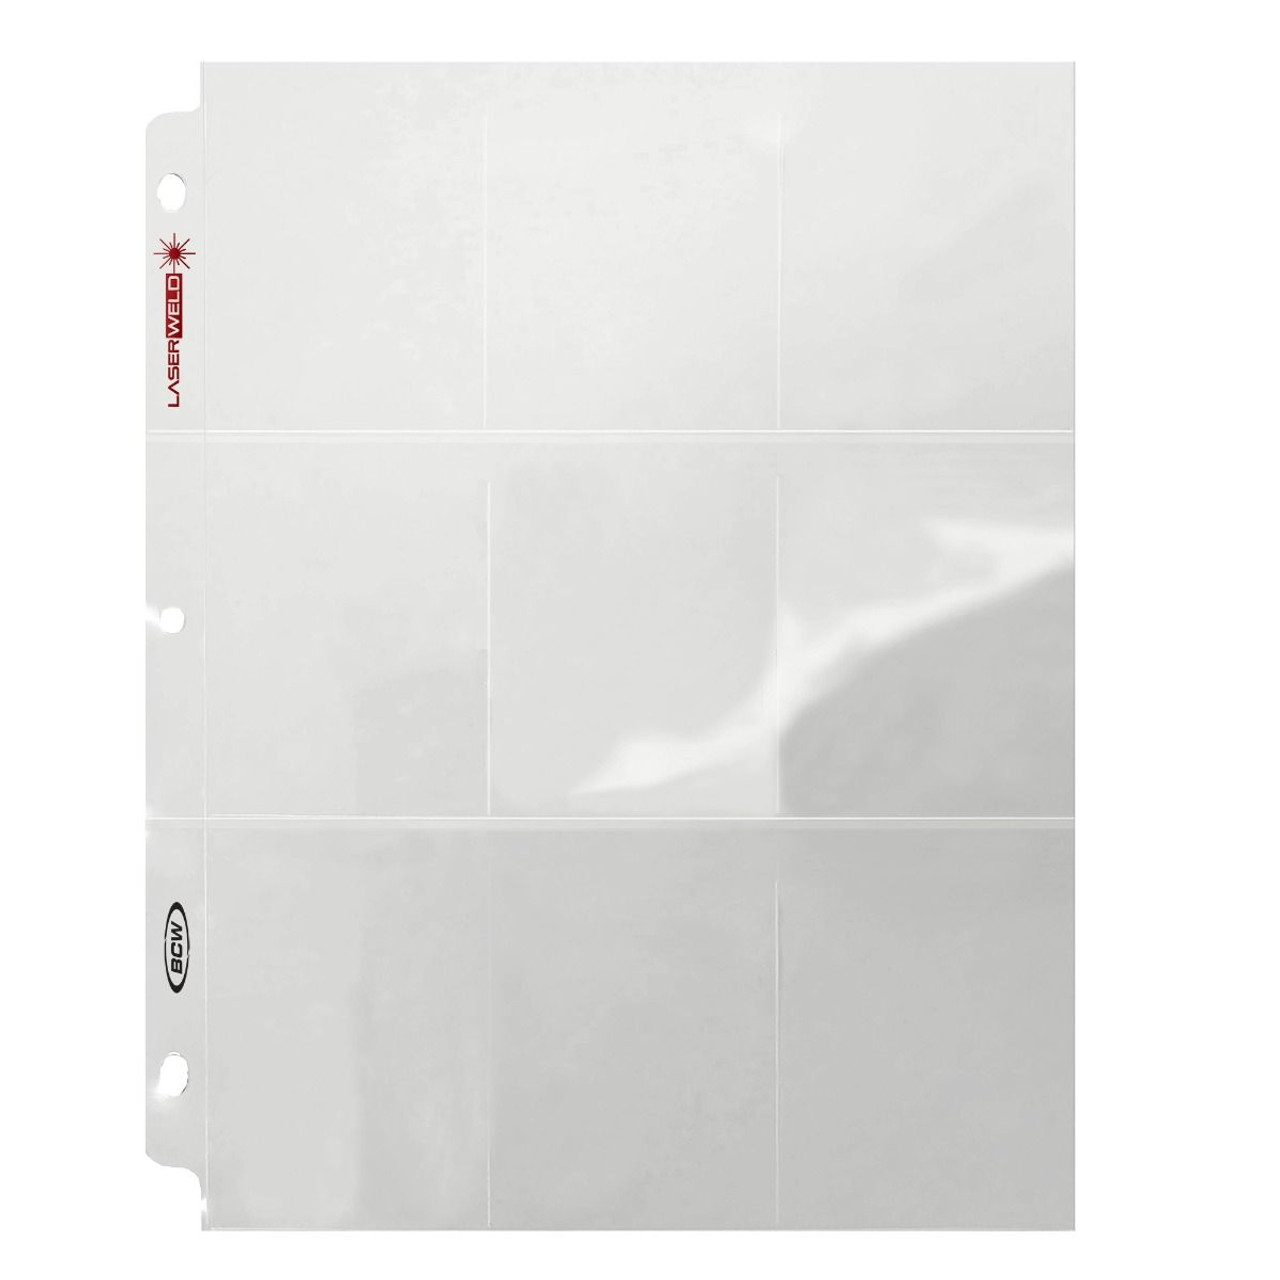 BCW LaserWeld 9-Pocket Pages 20ct Pack